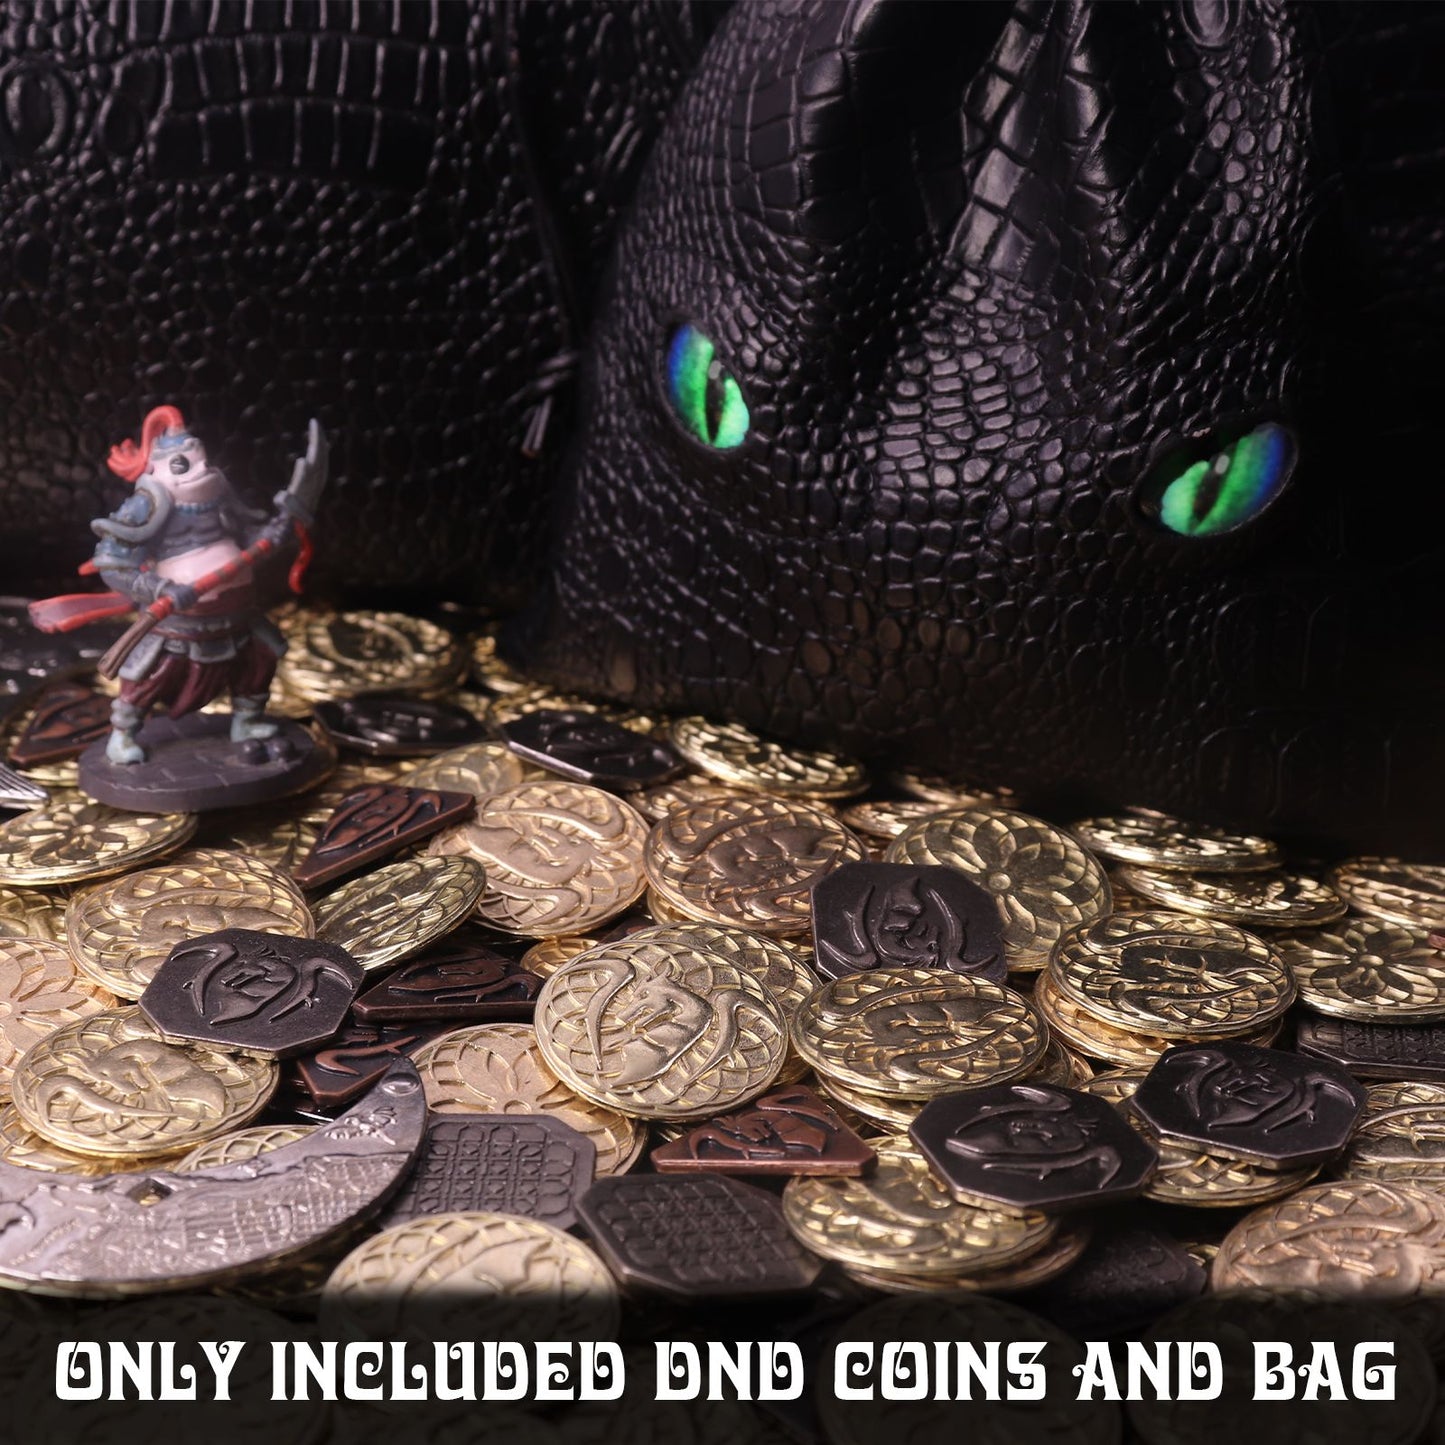 145PCS Metal DND Coins & Leather Bag, Contains 60 Gold Coins, 40 Sliver Coins, 40 Copper Coins and 5 Platinum Coins, Game Tokens with Glow in The Night Eyes Leather Bag for RPG Tablelap Games